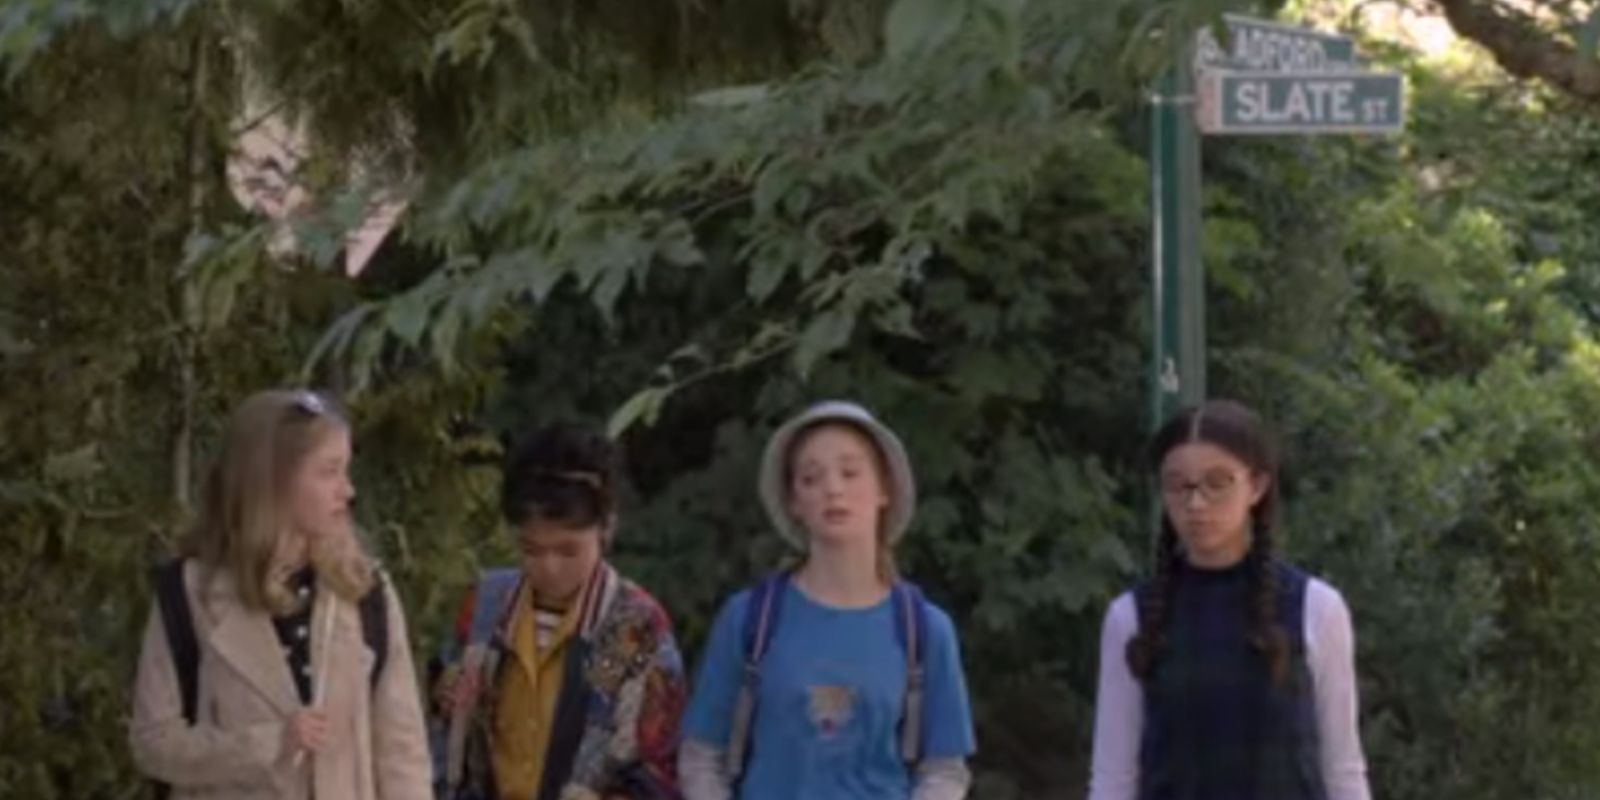 The Girls Walk On Bradford Ct In The Baby-Sitters Club On Netflix